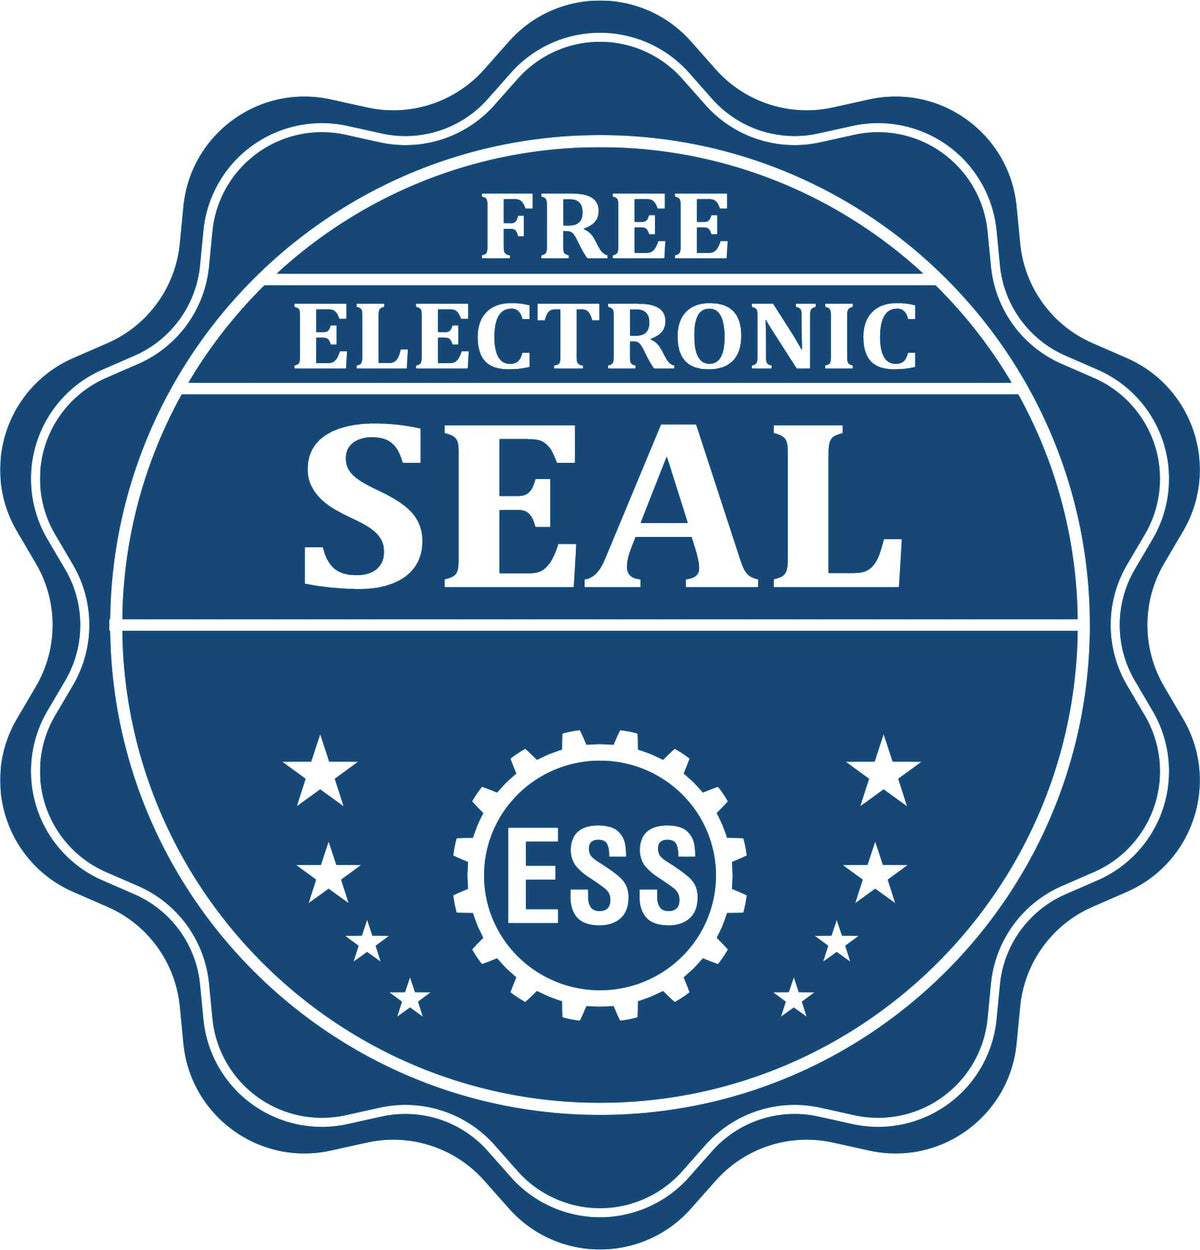 A badge showing a free electronic seal for the Gift Maryland Geologist Seal with stars and the ESS gear on the emblem.